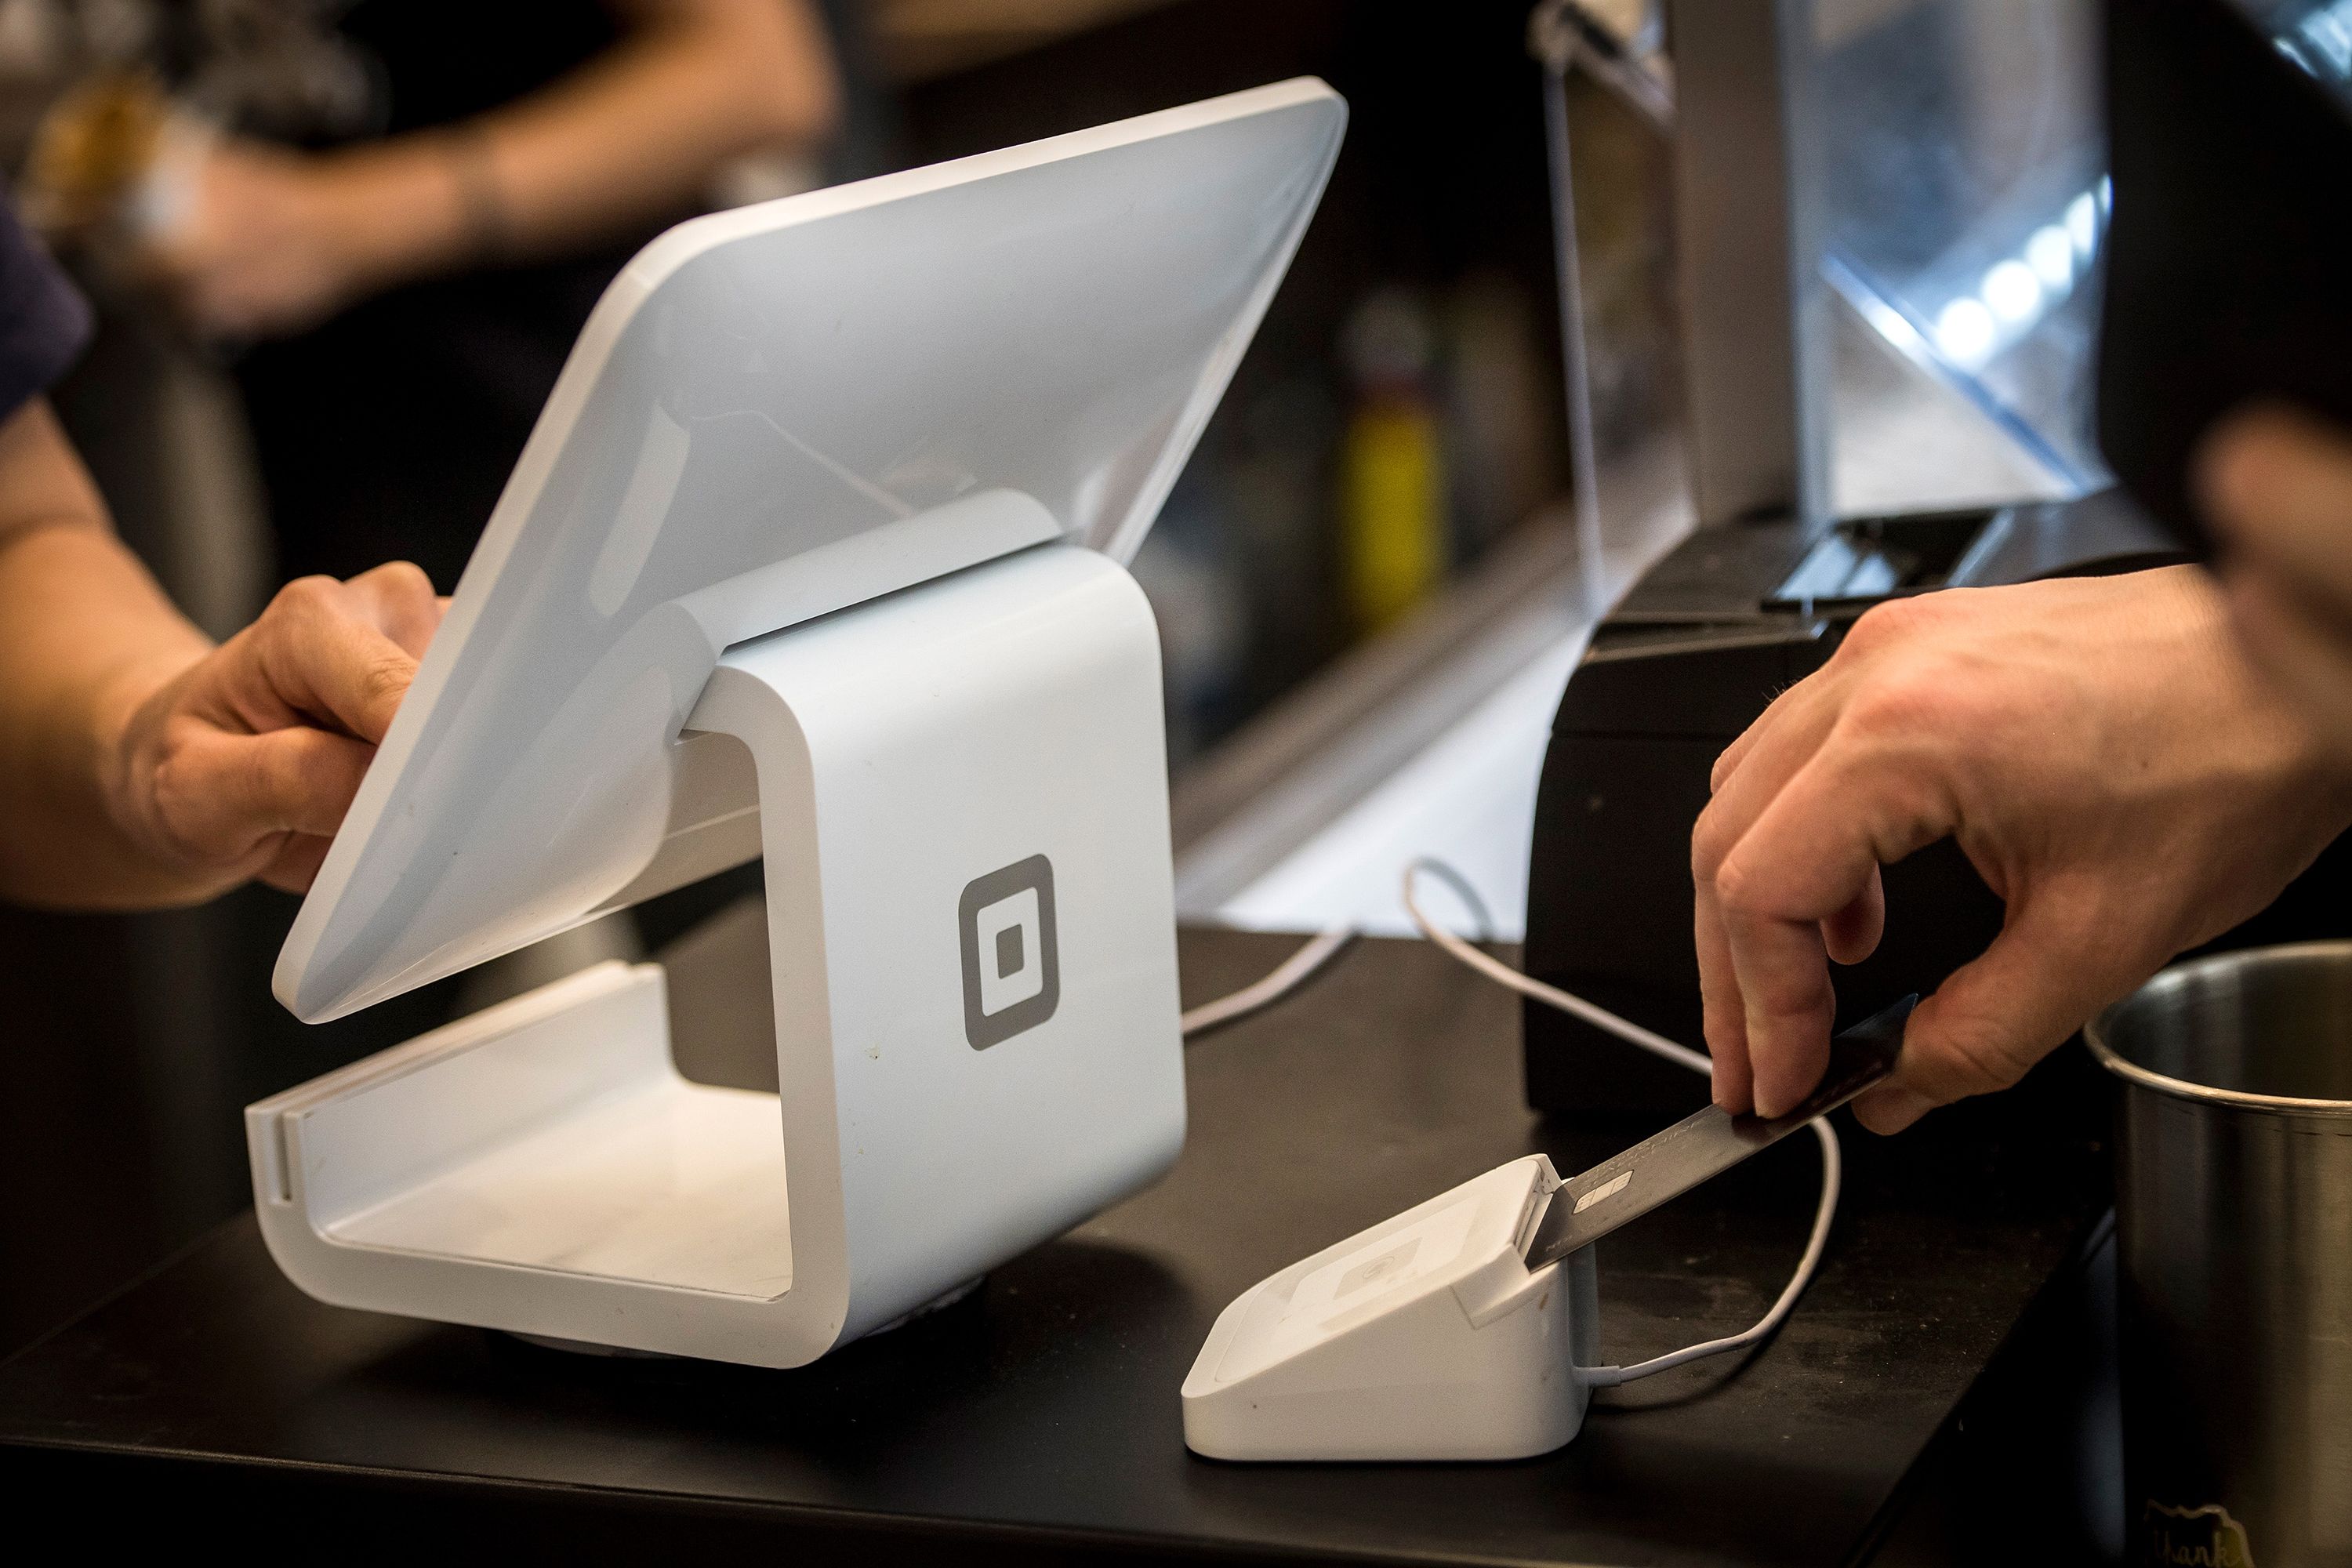 Square acquires Afterpay as BNPL space heats up